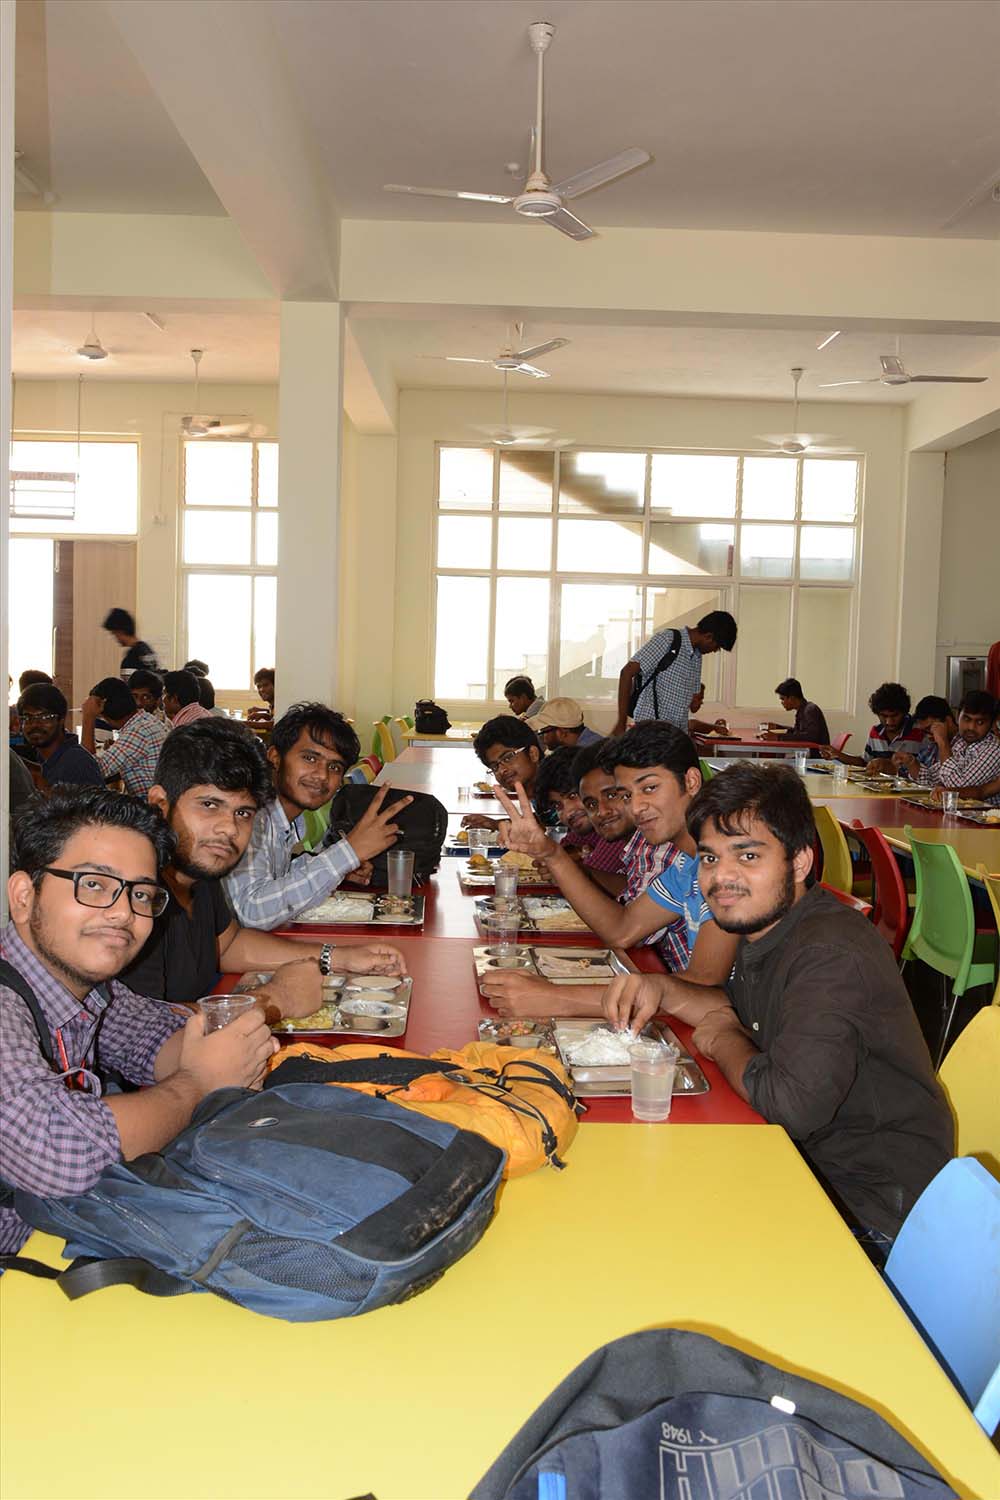 Indian Institute of Information Technology